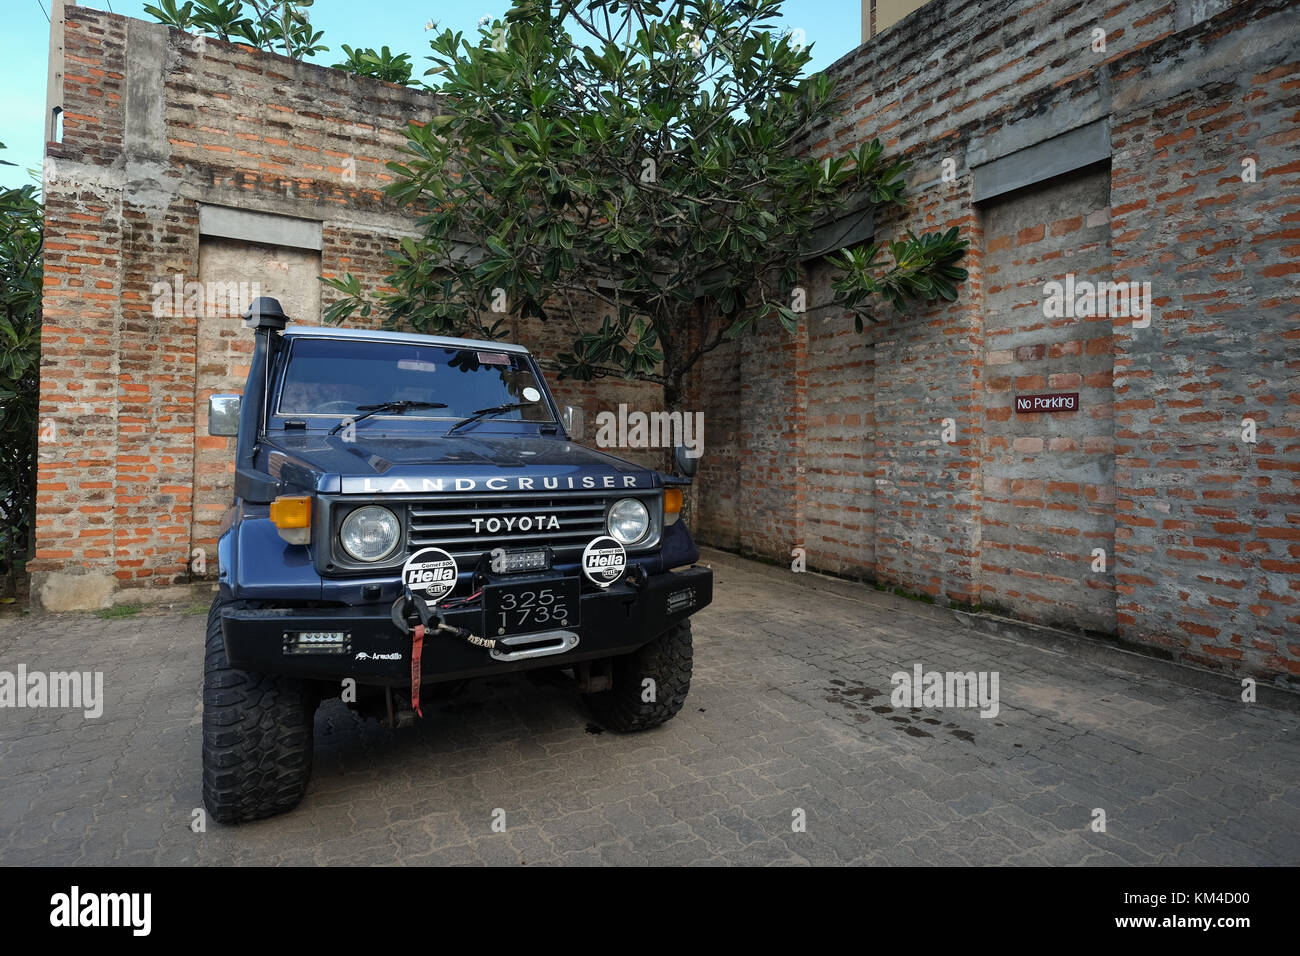 Colombo, Sri Lanka - Sep 5, 2015. A SUV car parking at a brick house in Colombo, Sri Lanka. Colombo is the largest city and the financial and commerci Stock Photo